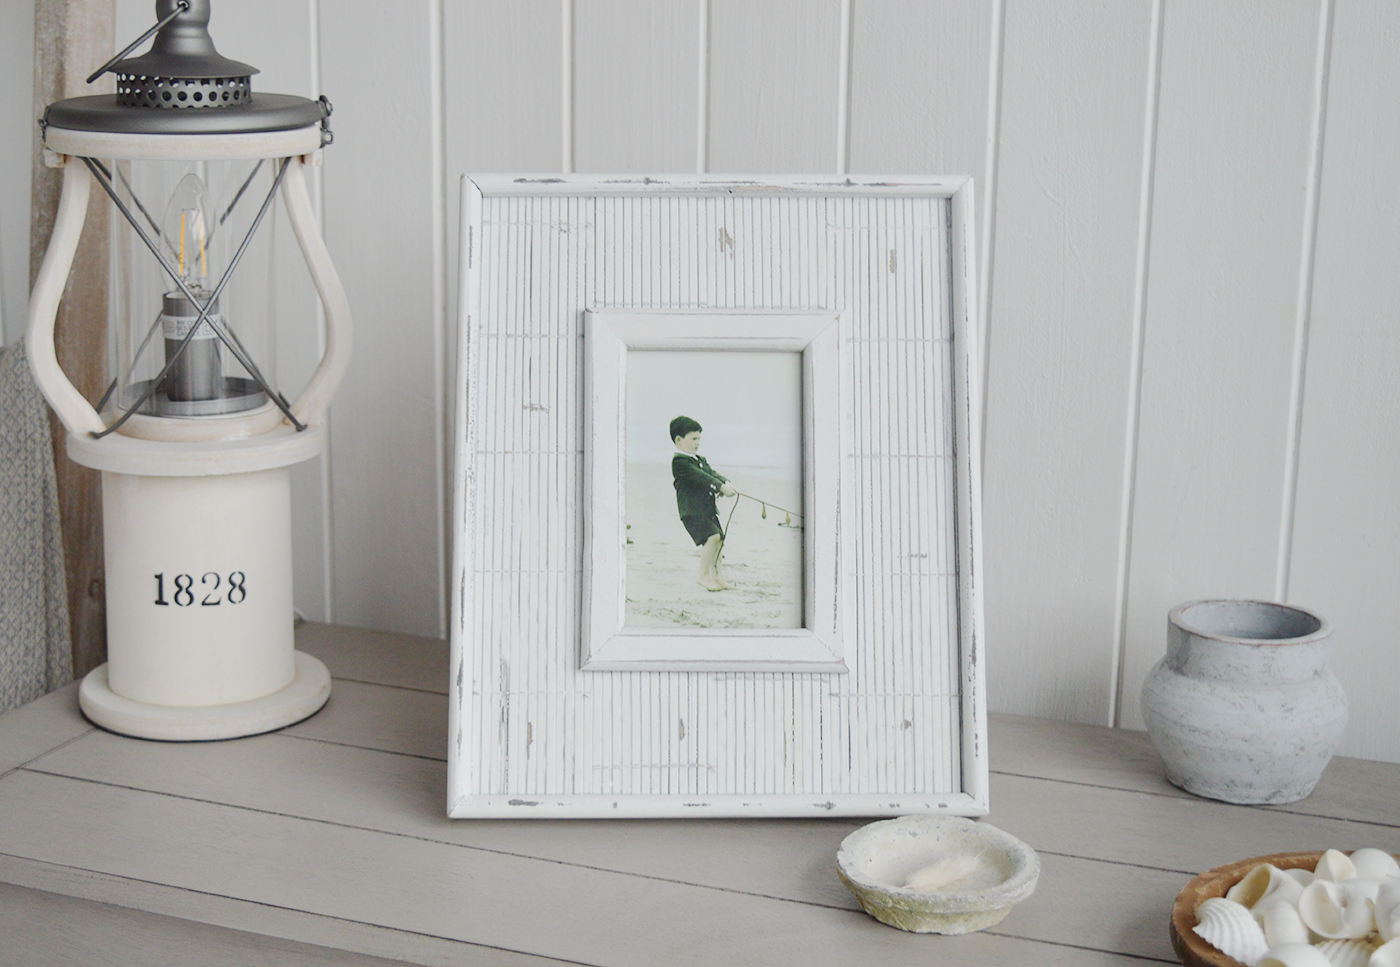 Weston Photo Frames - New England Coastal, Farmhouse, City and Country Furniture Homes and Interiors.